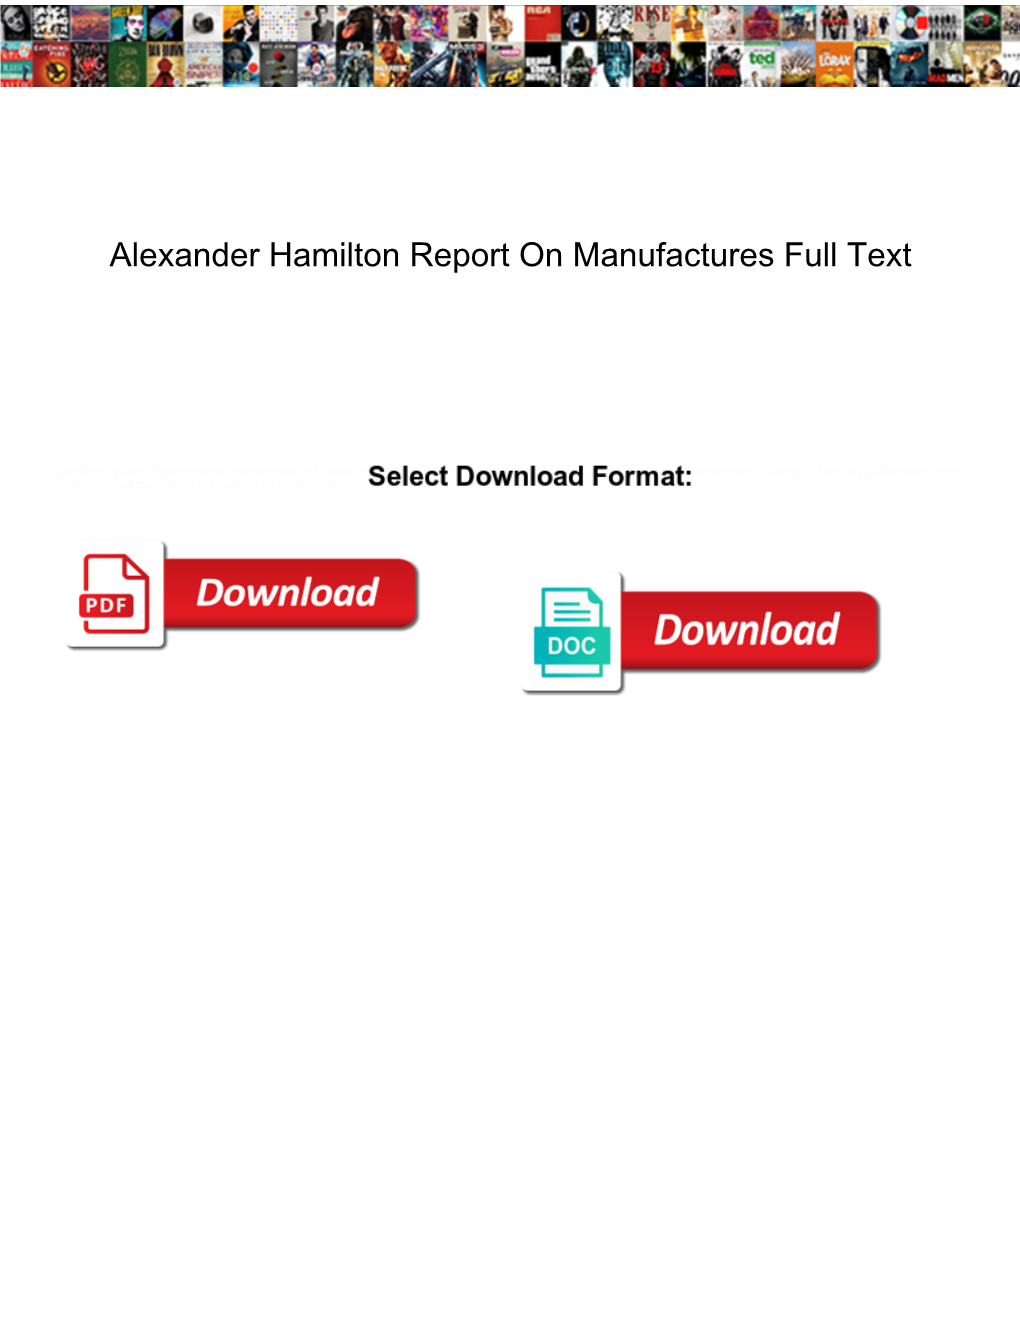 Alexander Hamilton Report on Manufactures Full Text